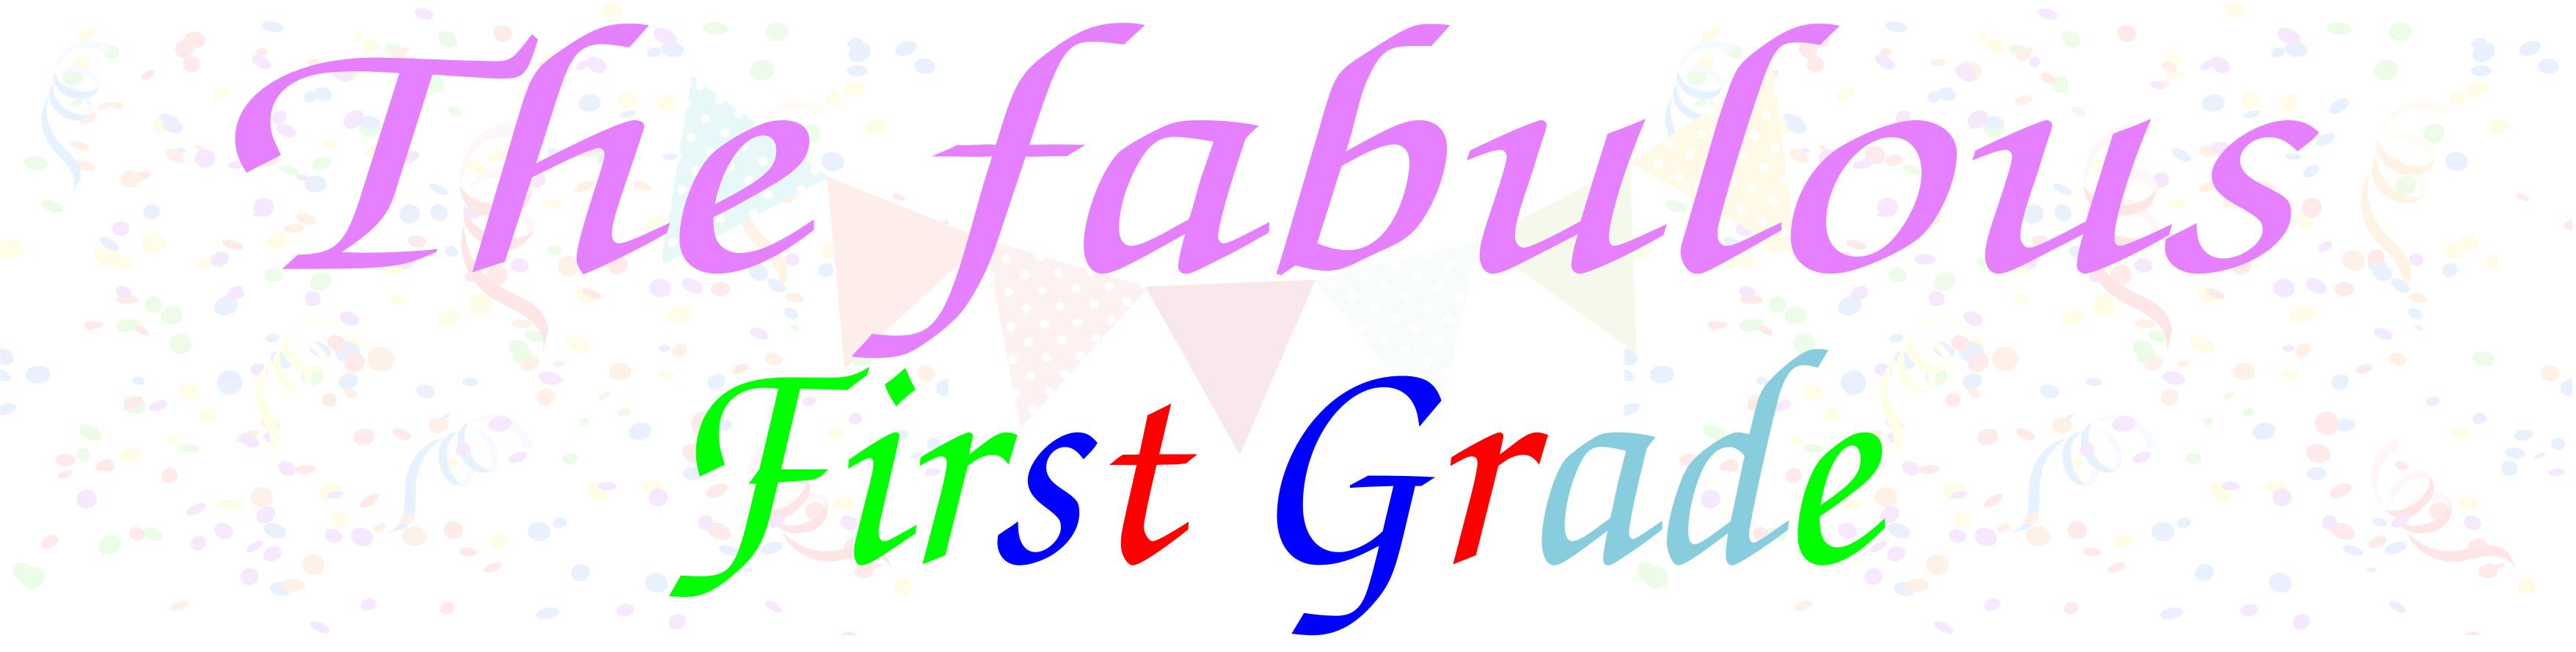 the fabulous first grade